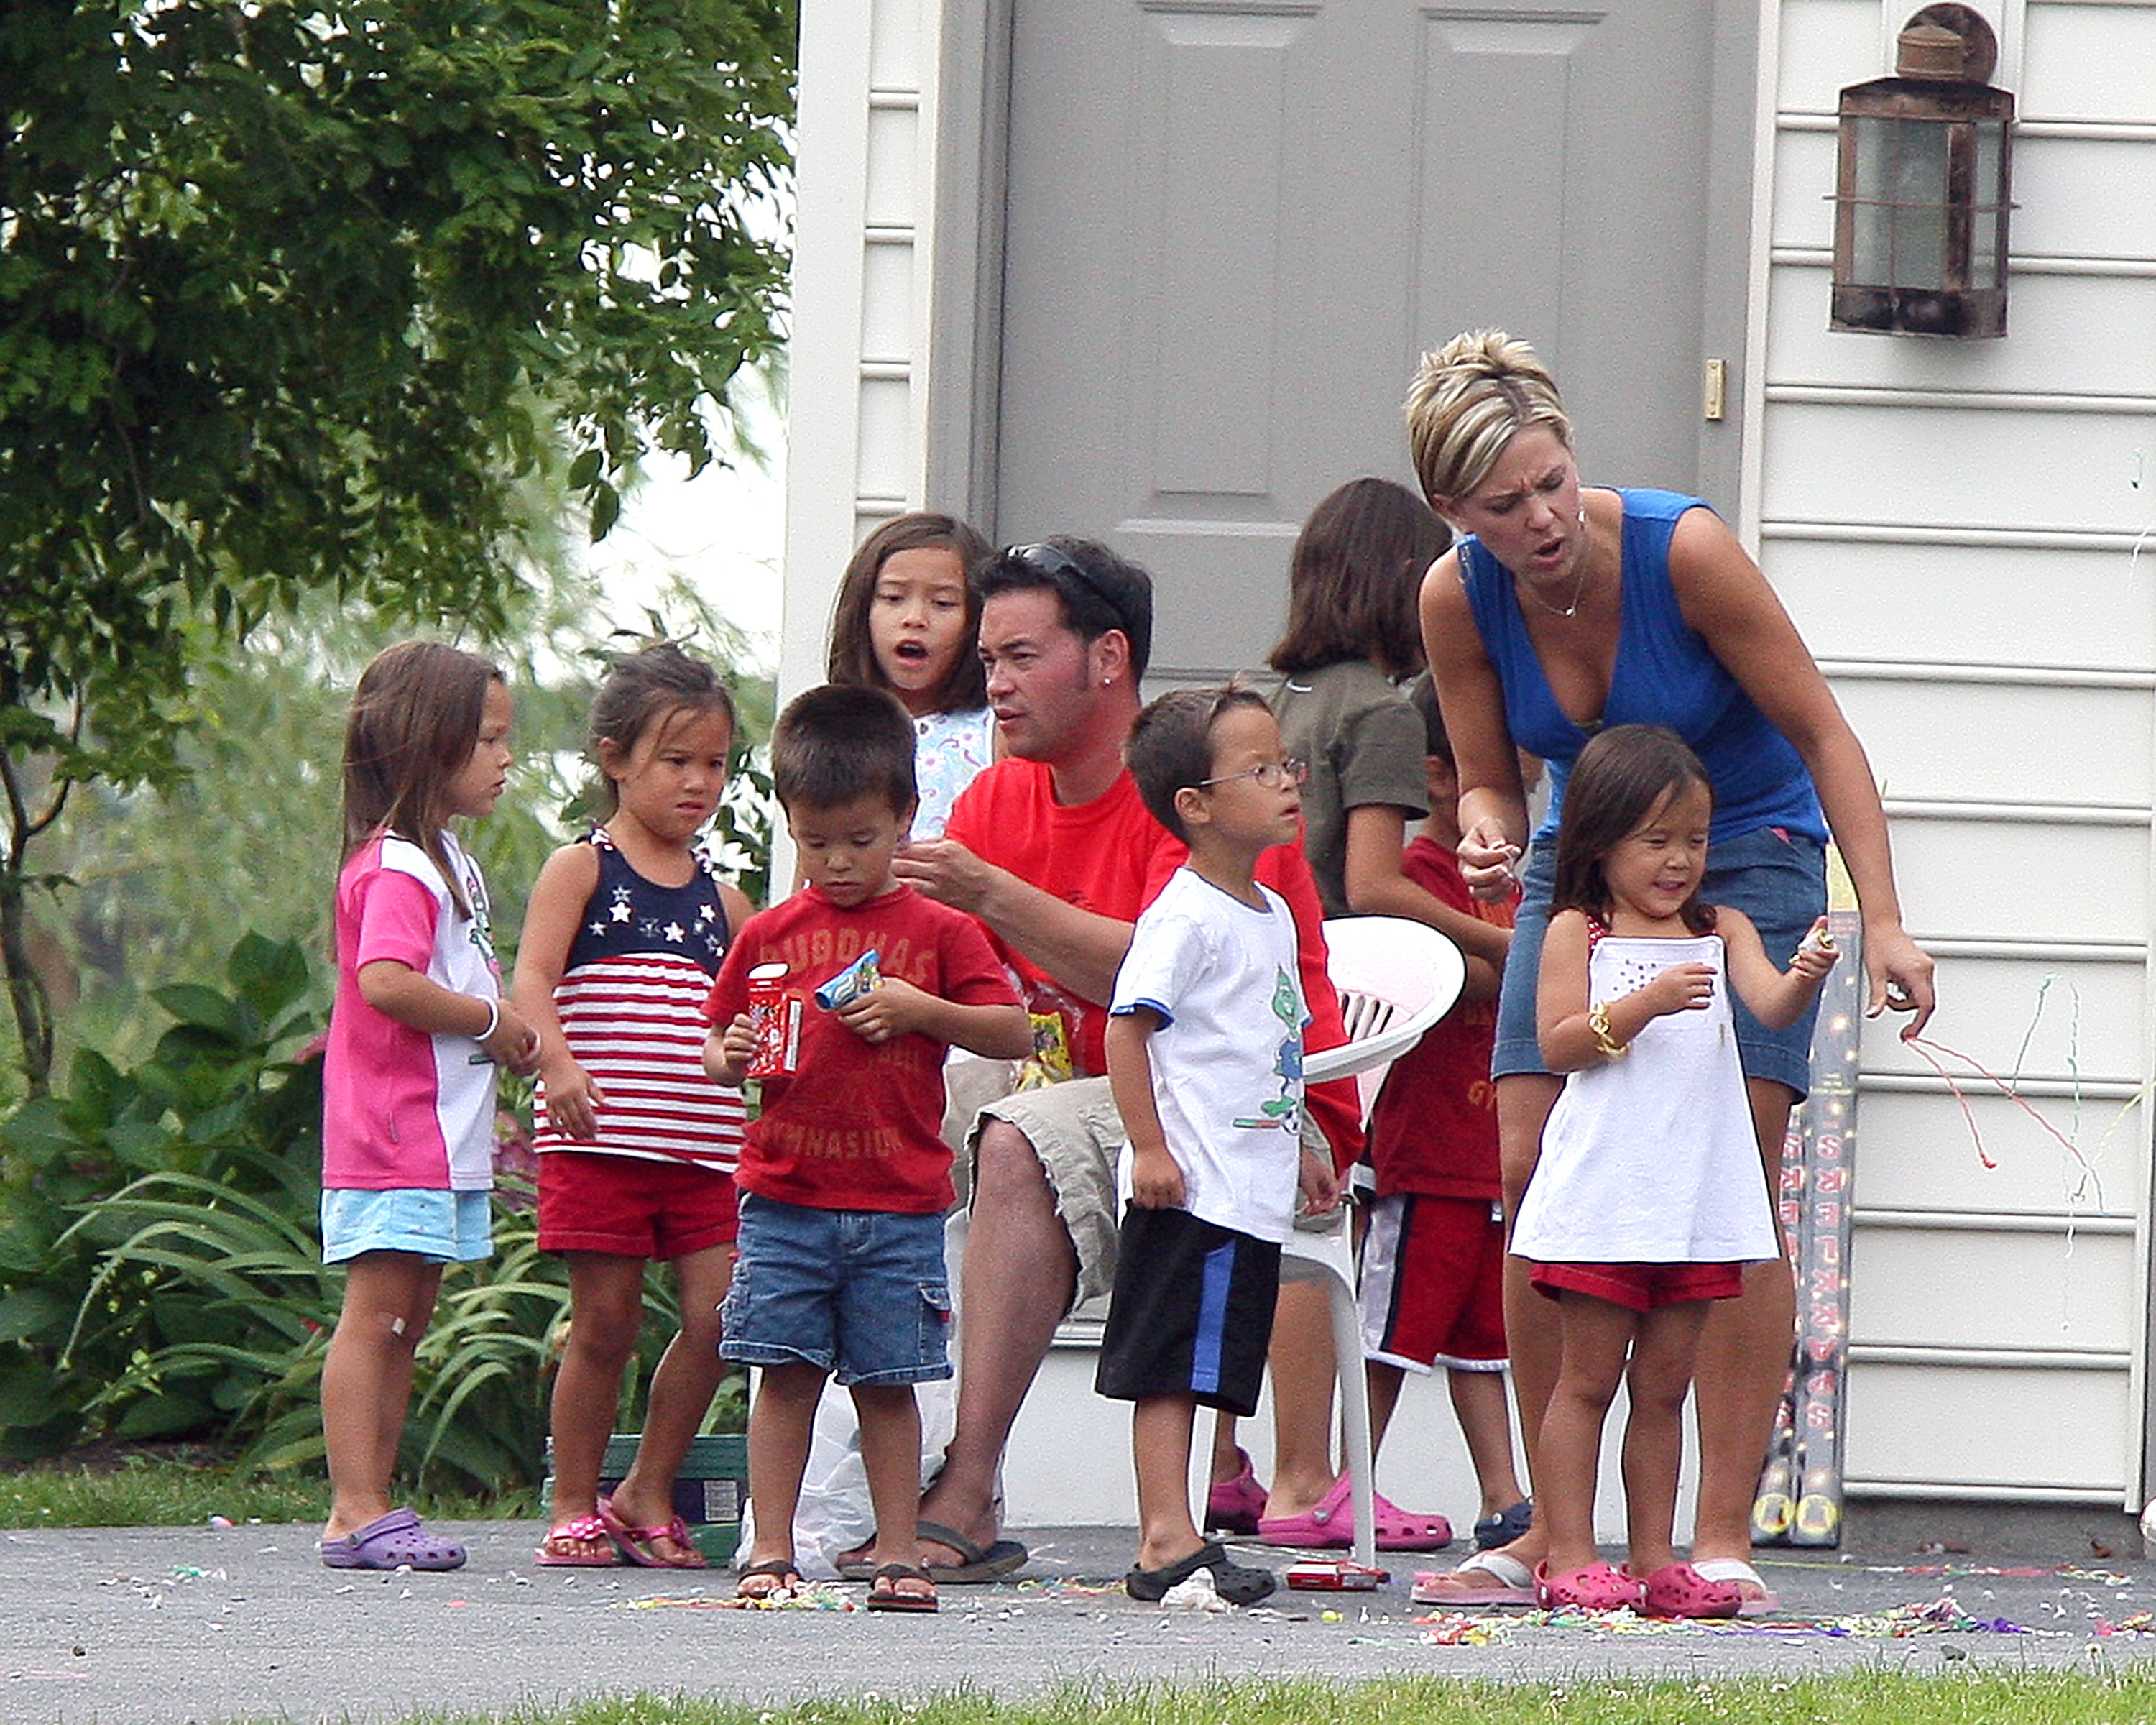 Jon, Kate, and their eight kids were the stars of Jon and Kate Plus 8 on TLC